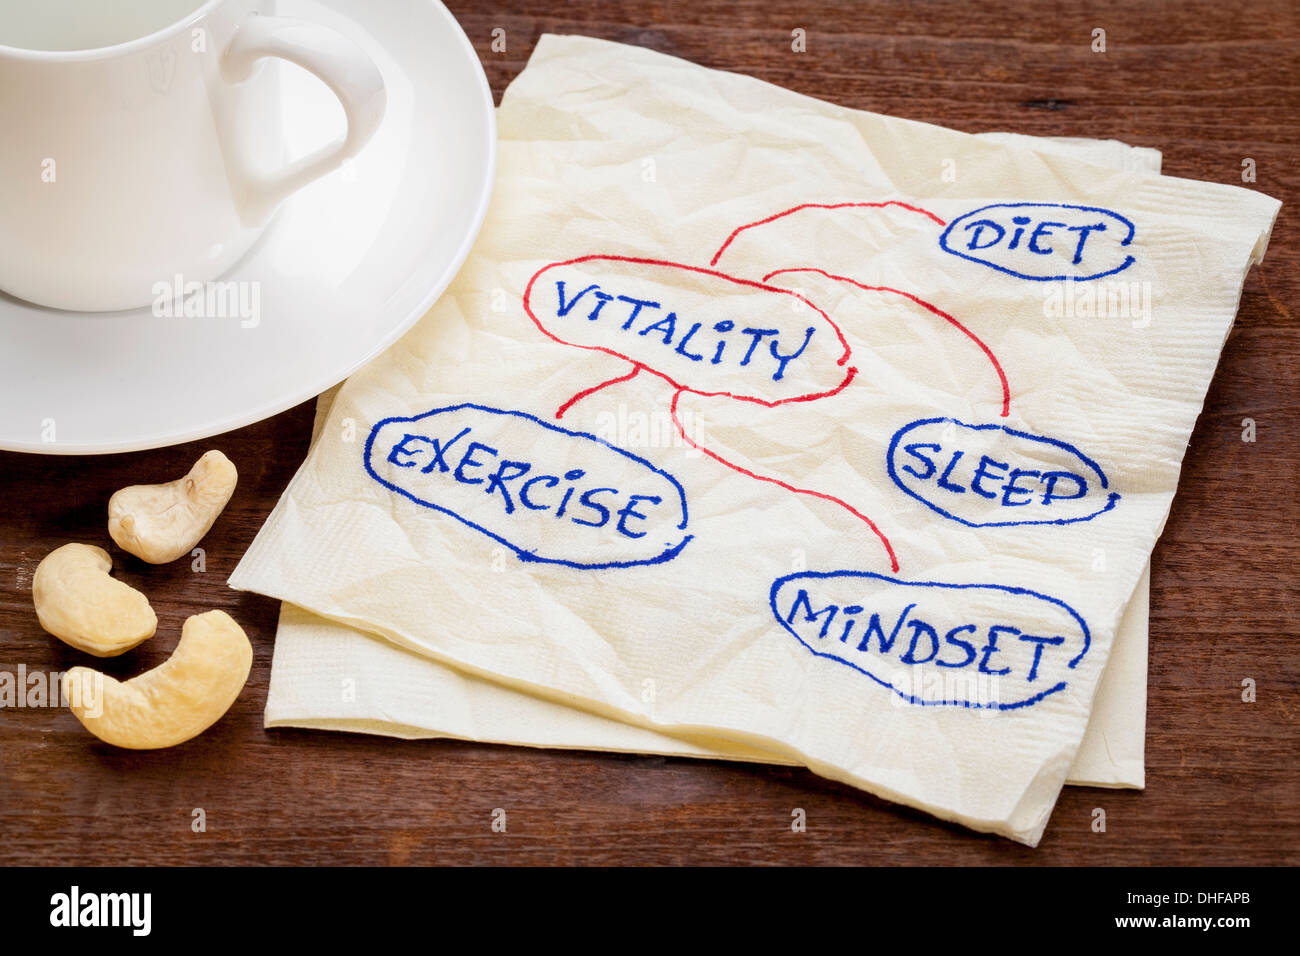 diet, sleep, exercise and mindset - vitality concept - a sketch on a napkin with cup of coffee Stock Photo